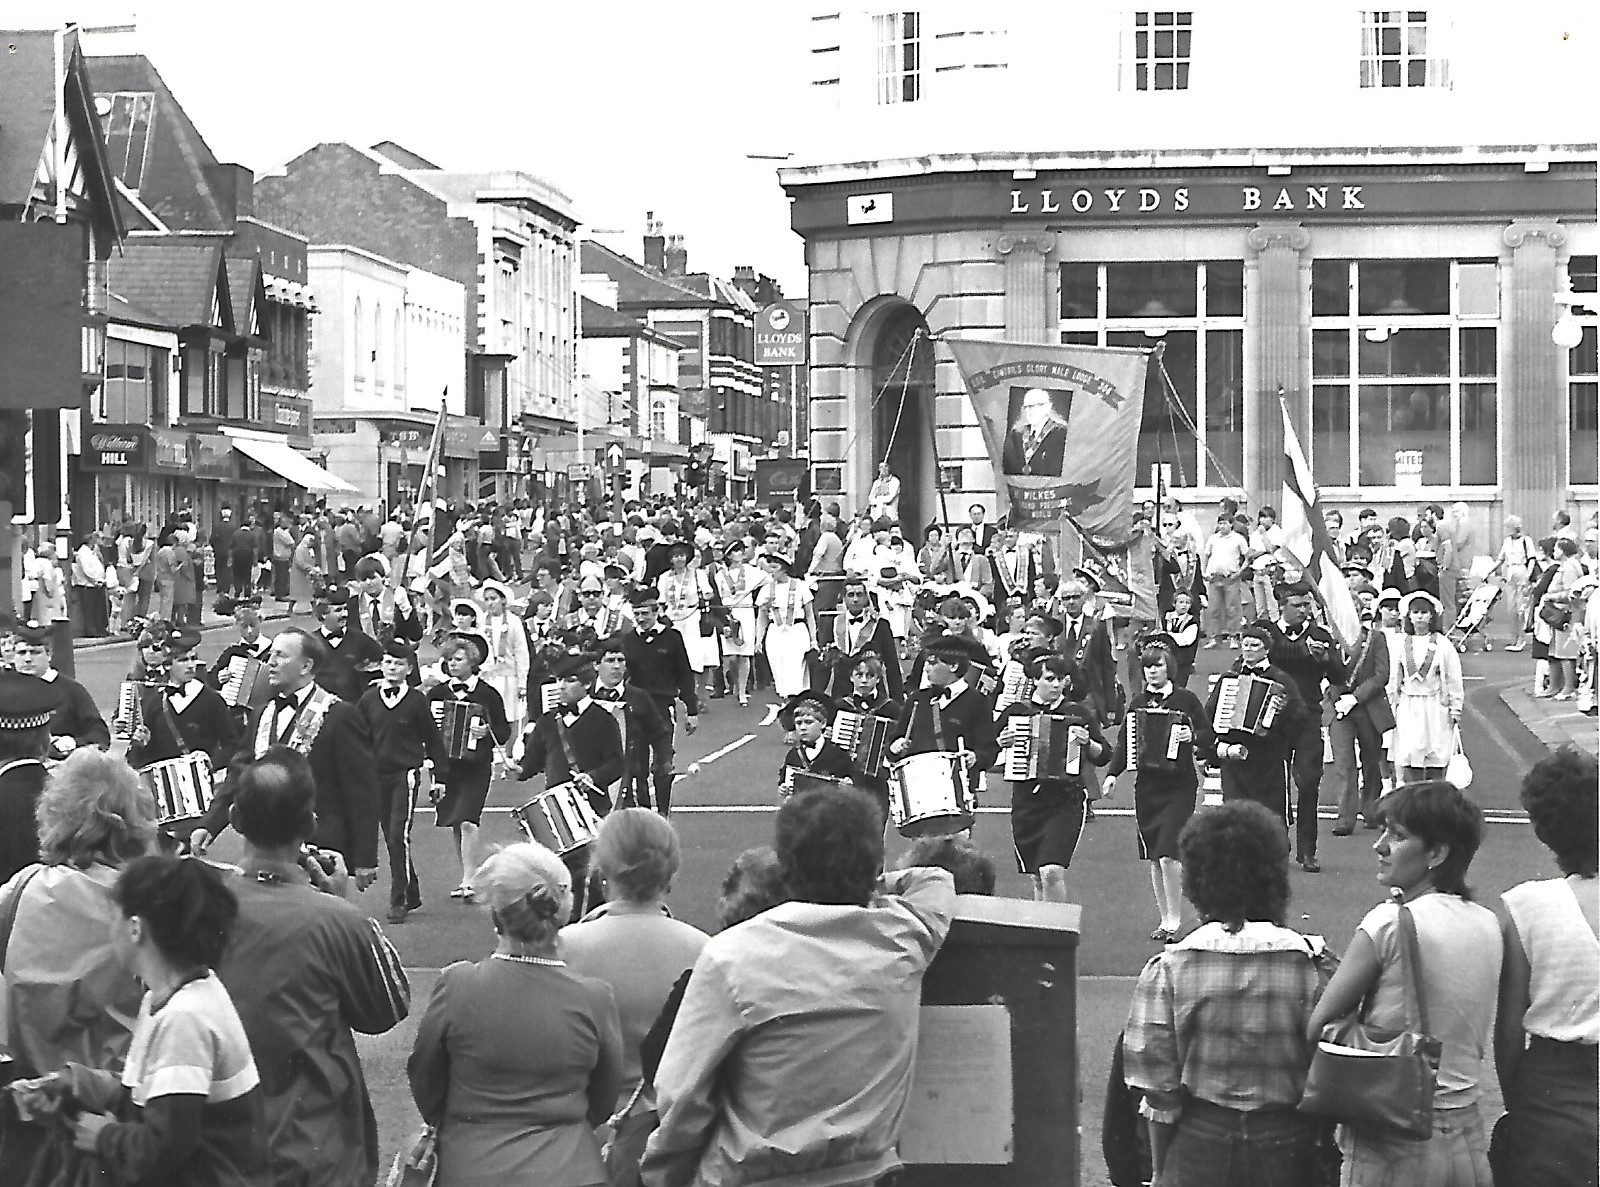 The Orange Lodge Parade in Southport town centre in July 1984